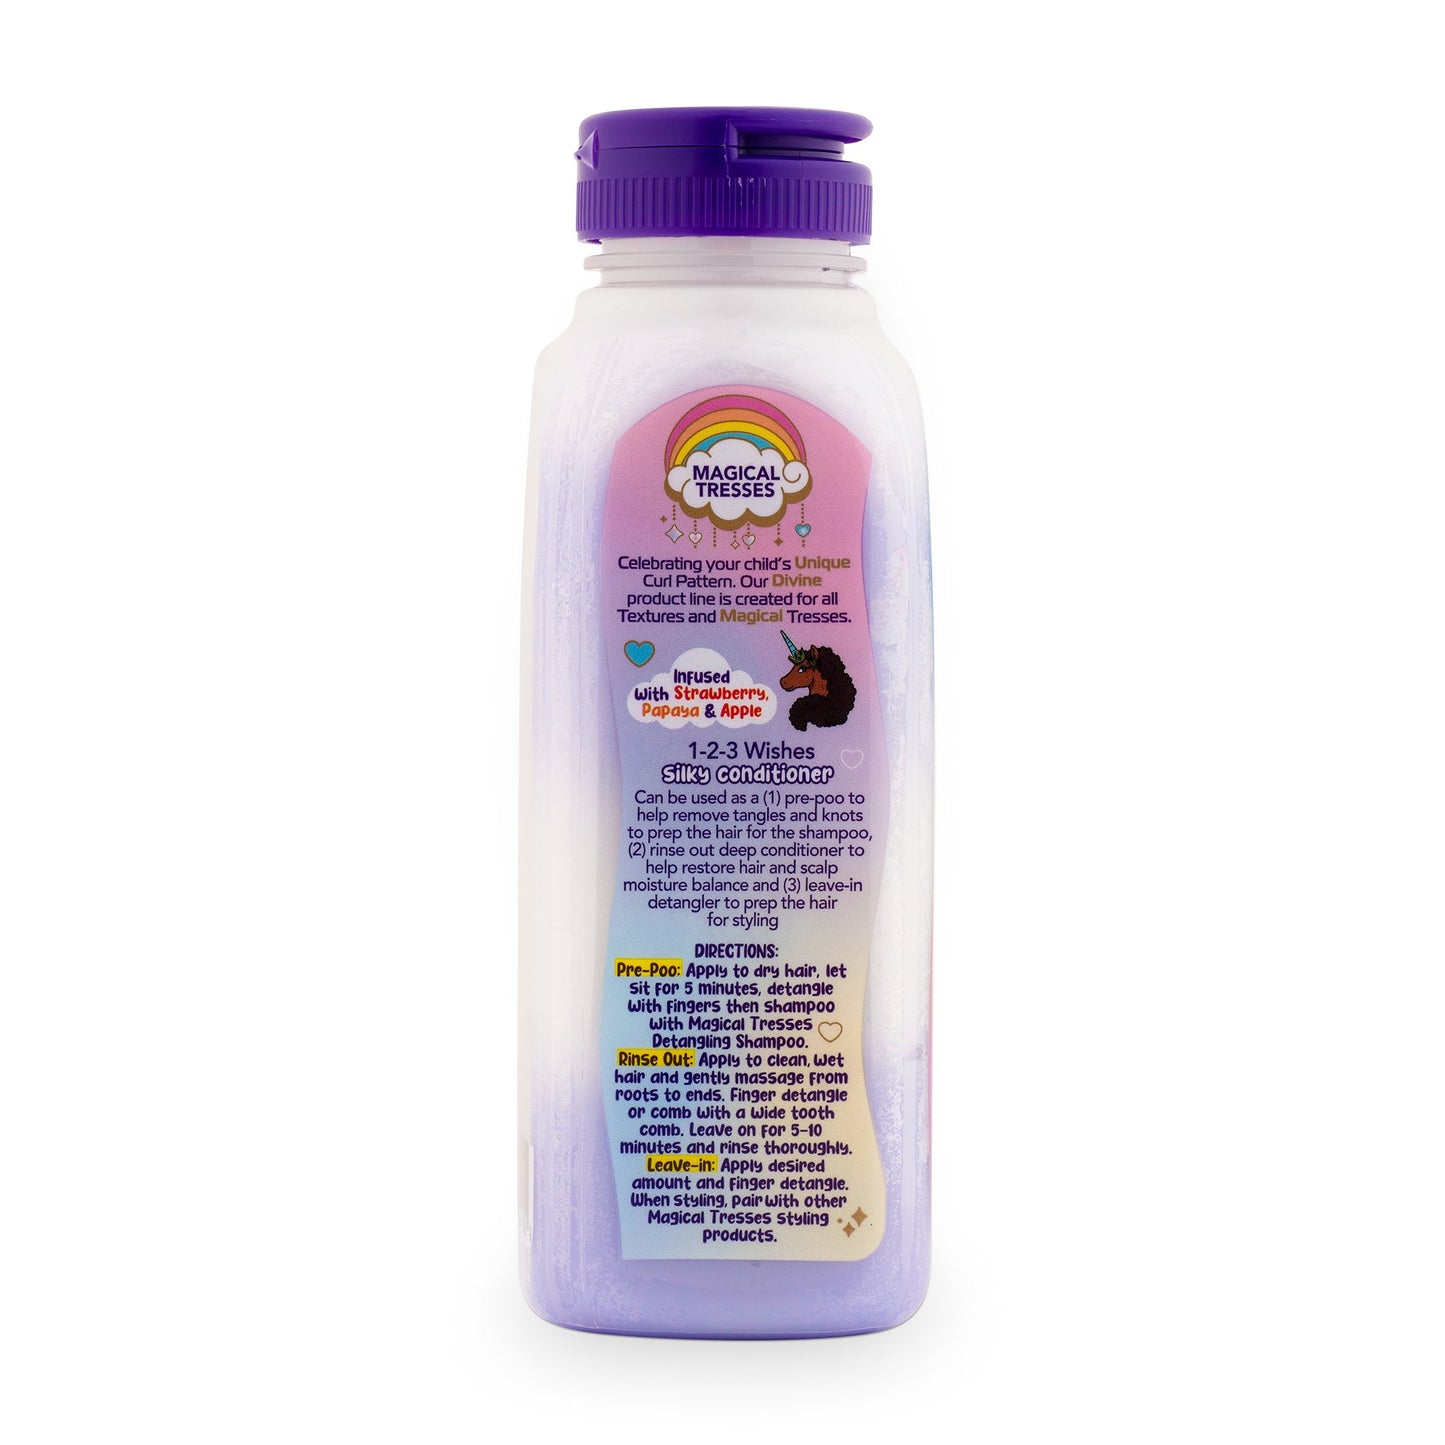 Afro Unicorn 1-2-3 Wishes Silky conditioner back of product.